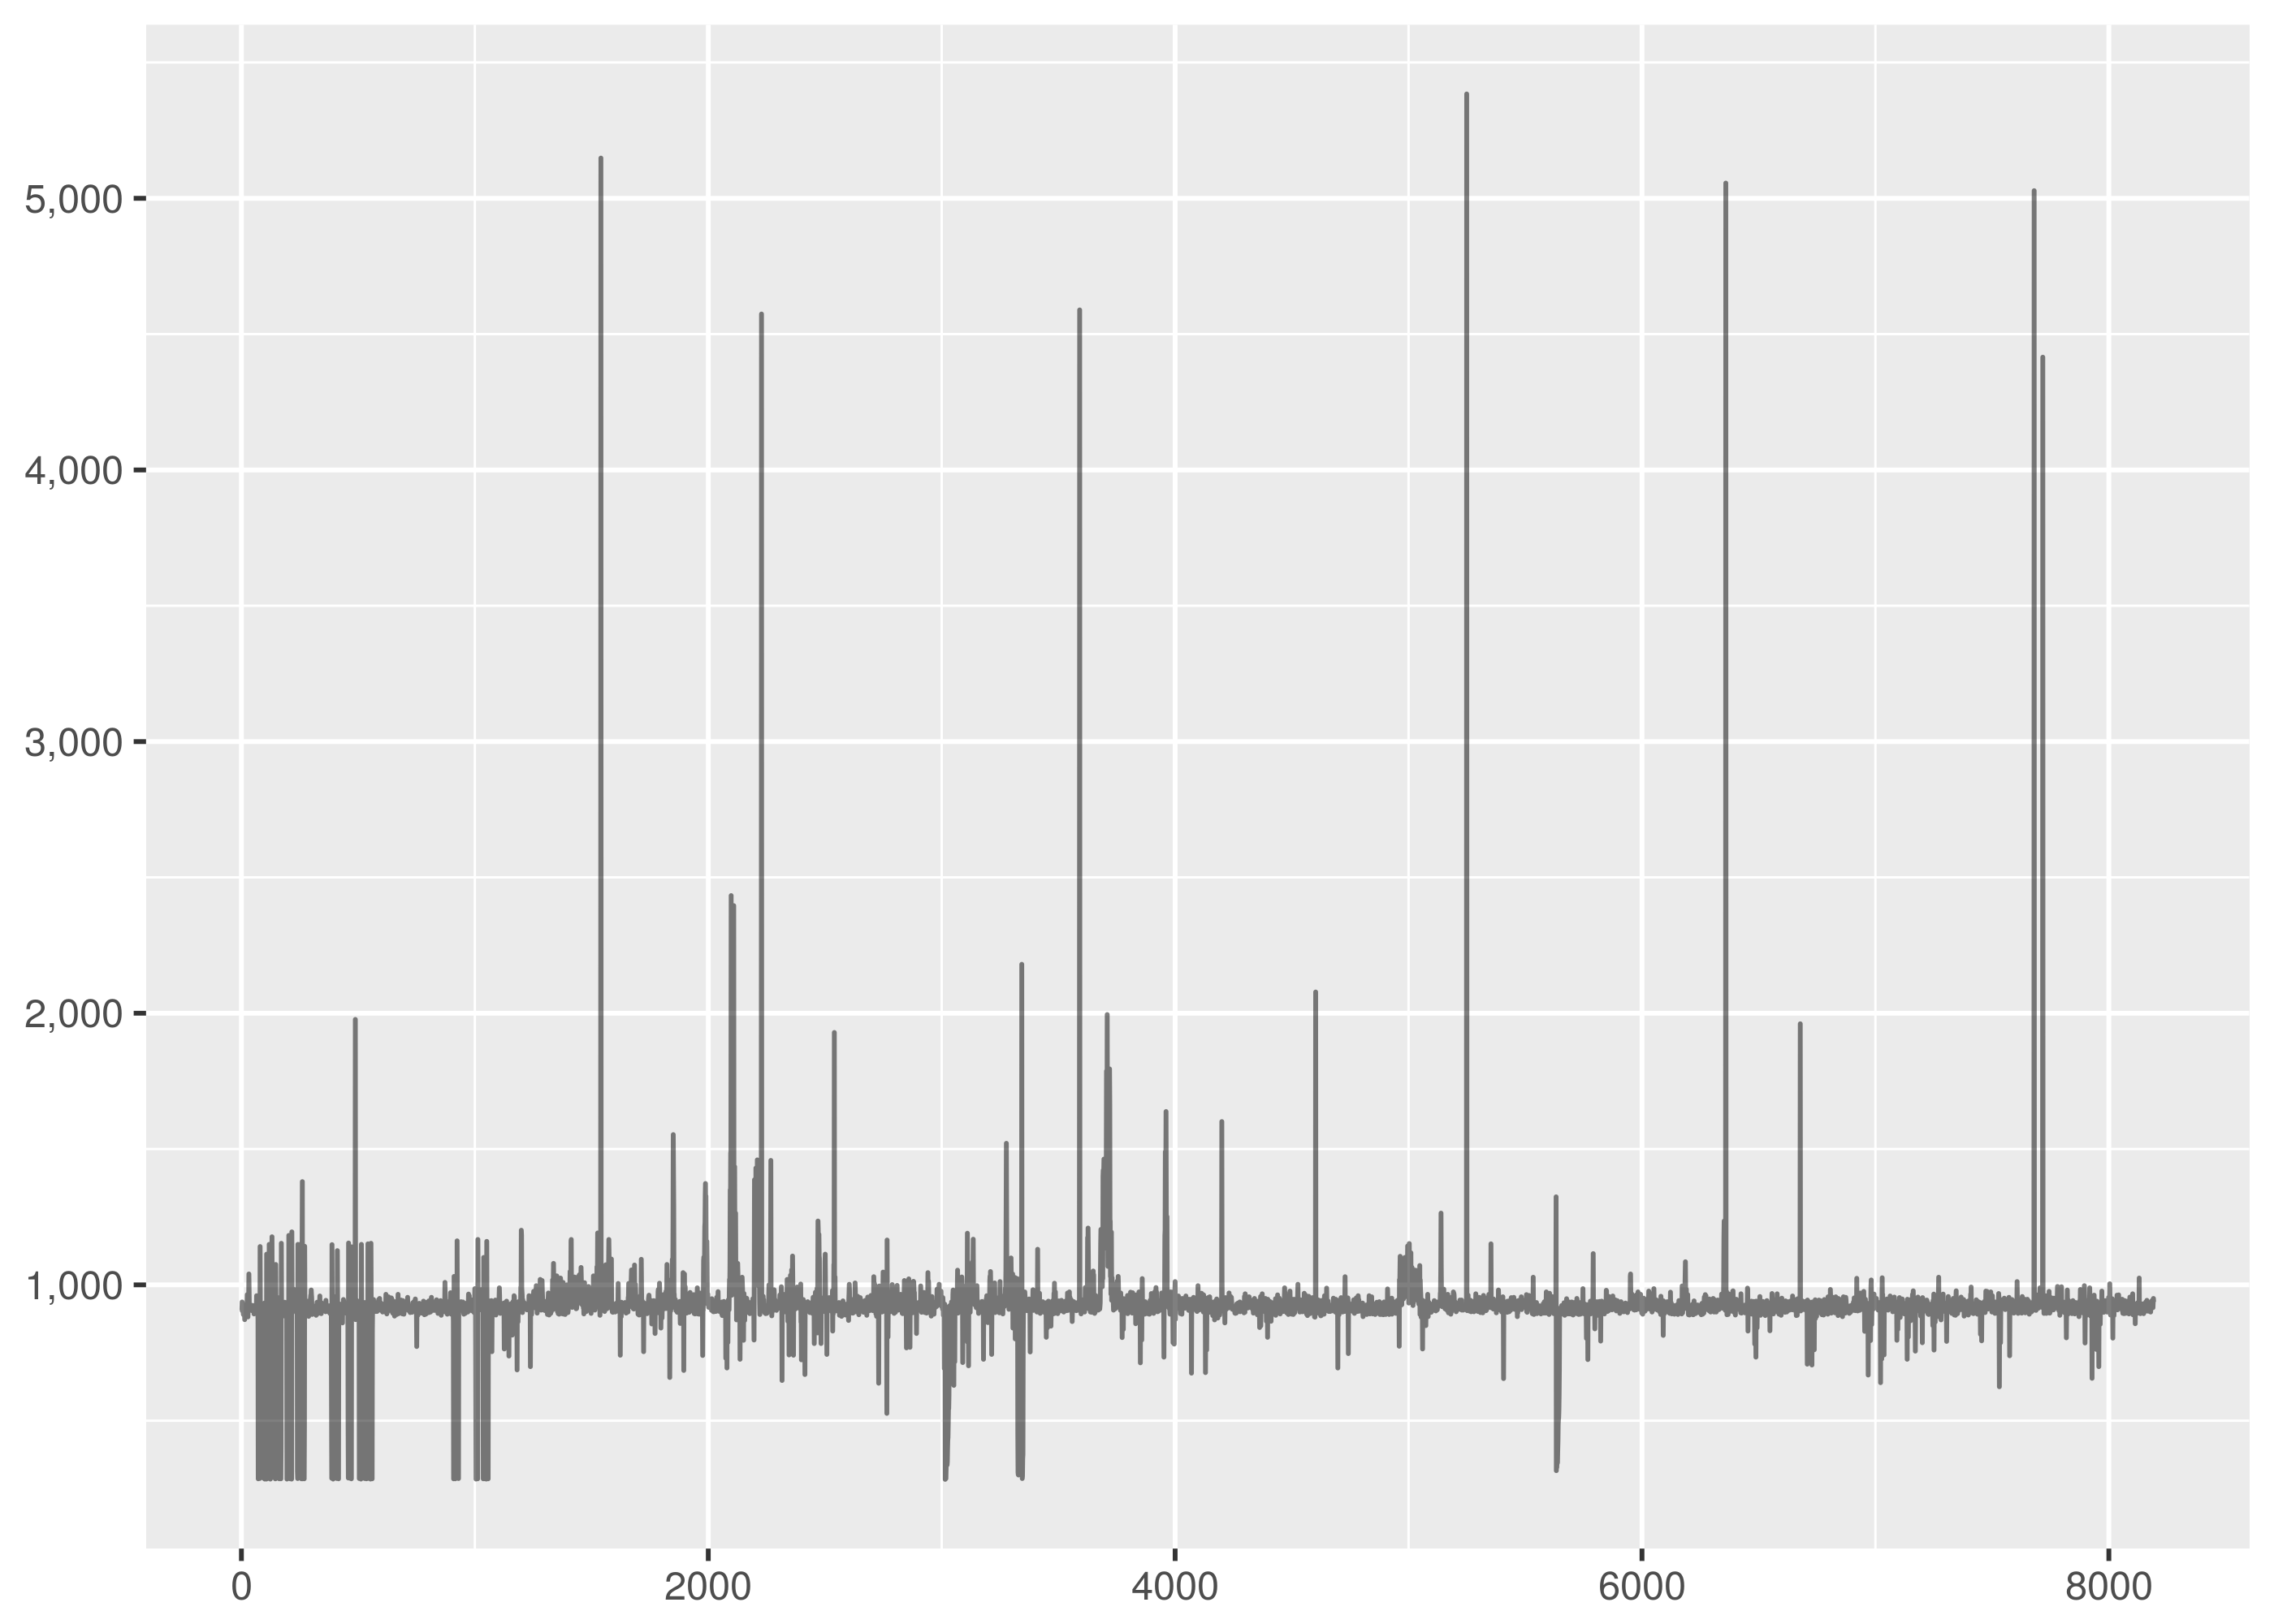 _images/http-timeseries-1.png